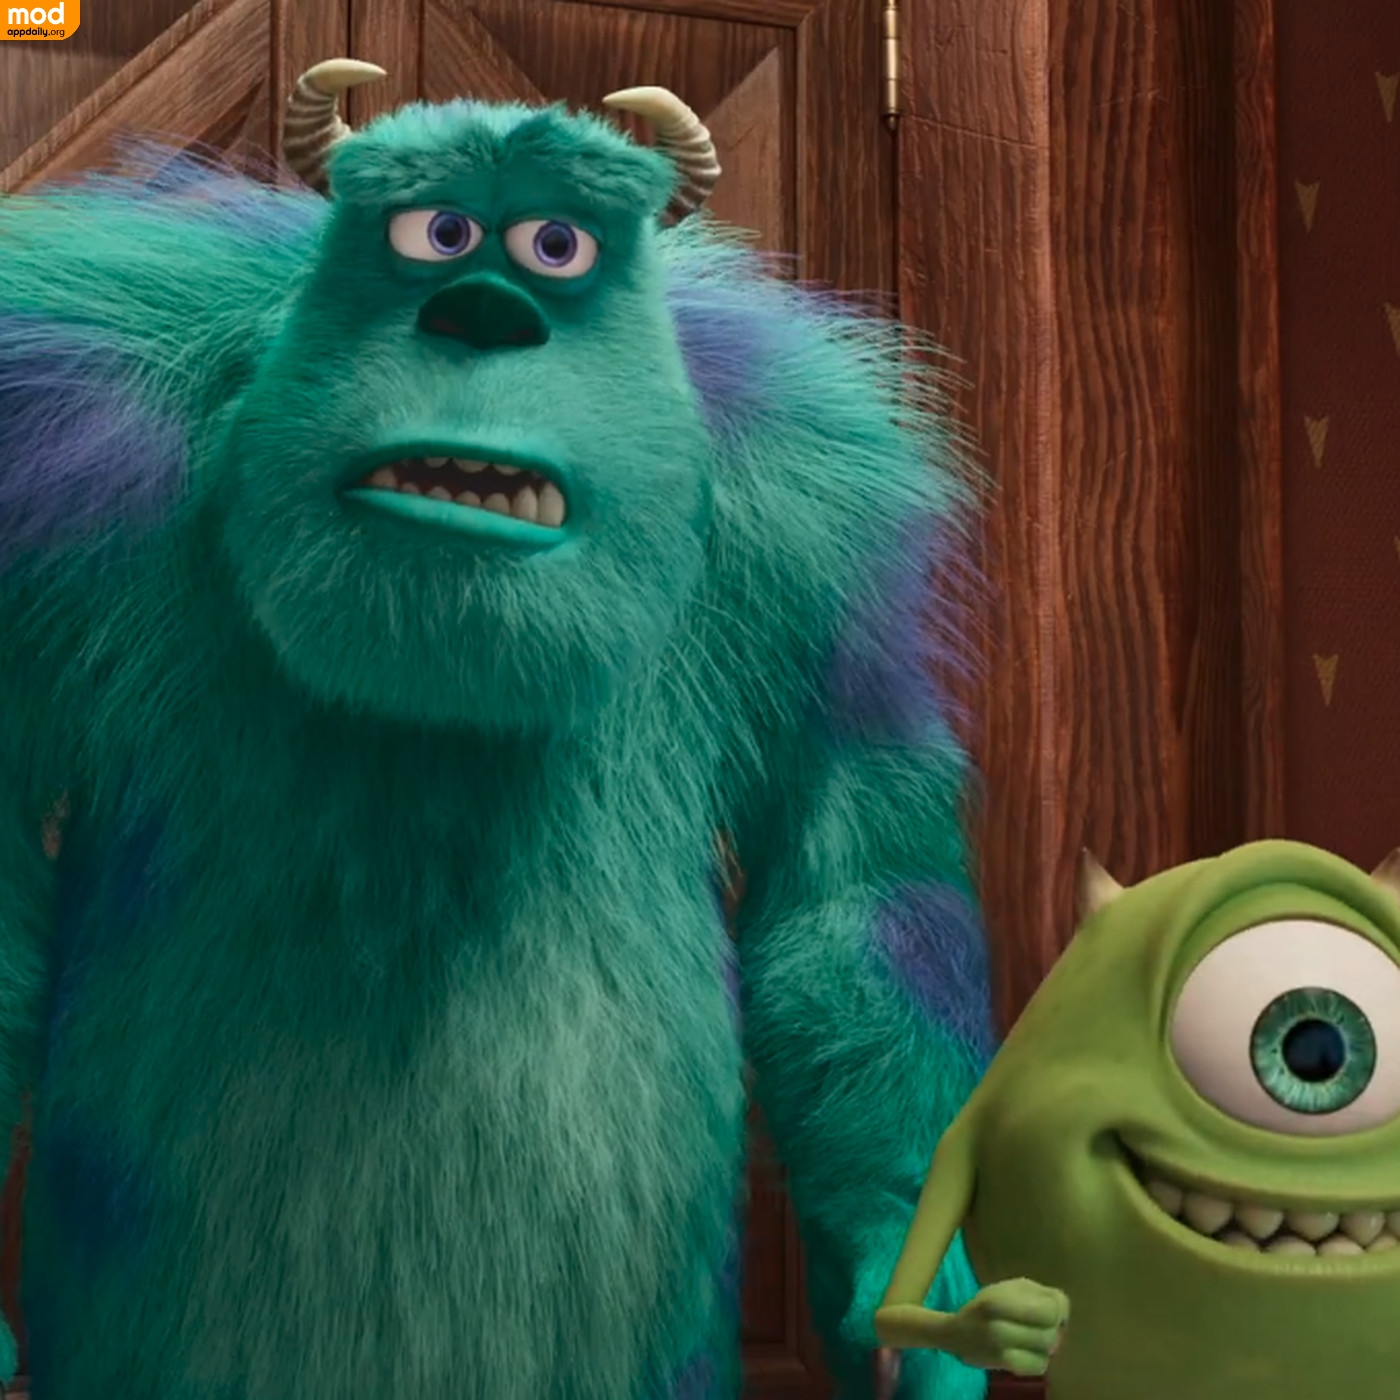 Sullivan - Blue Monster from Monsters Inc tries to teach Mike how to roar before they go to bed